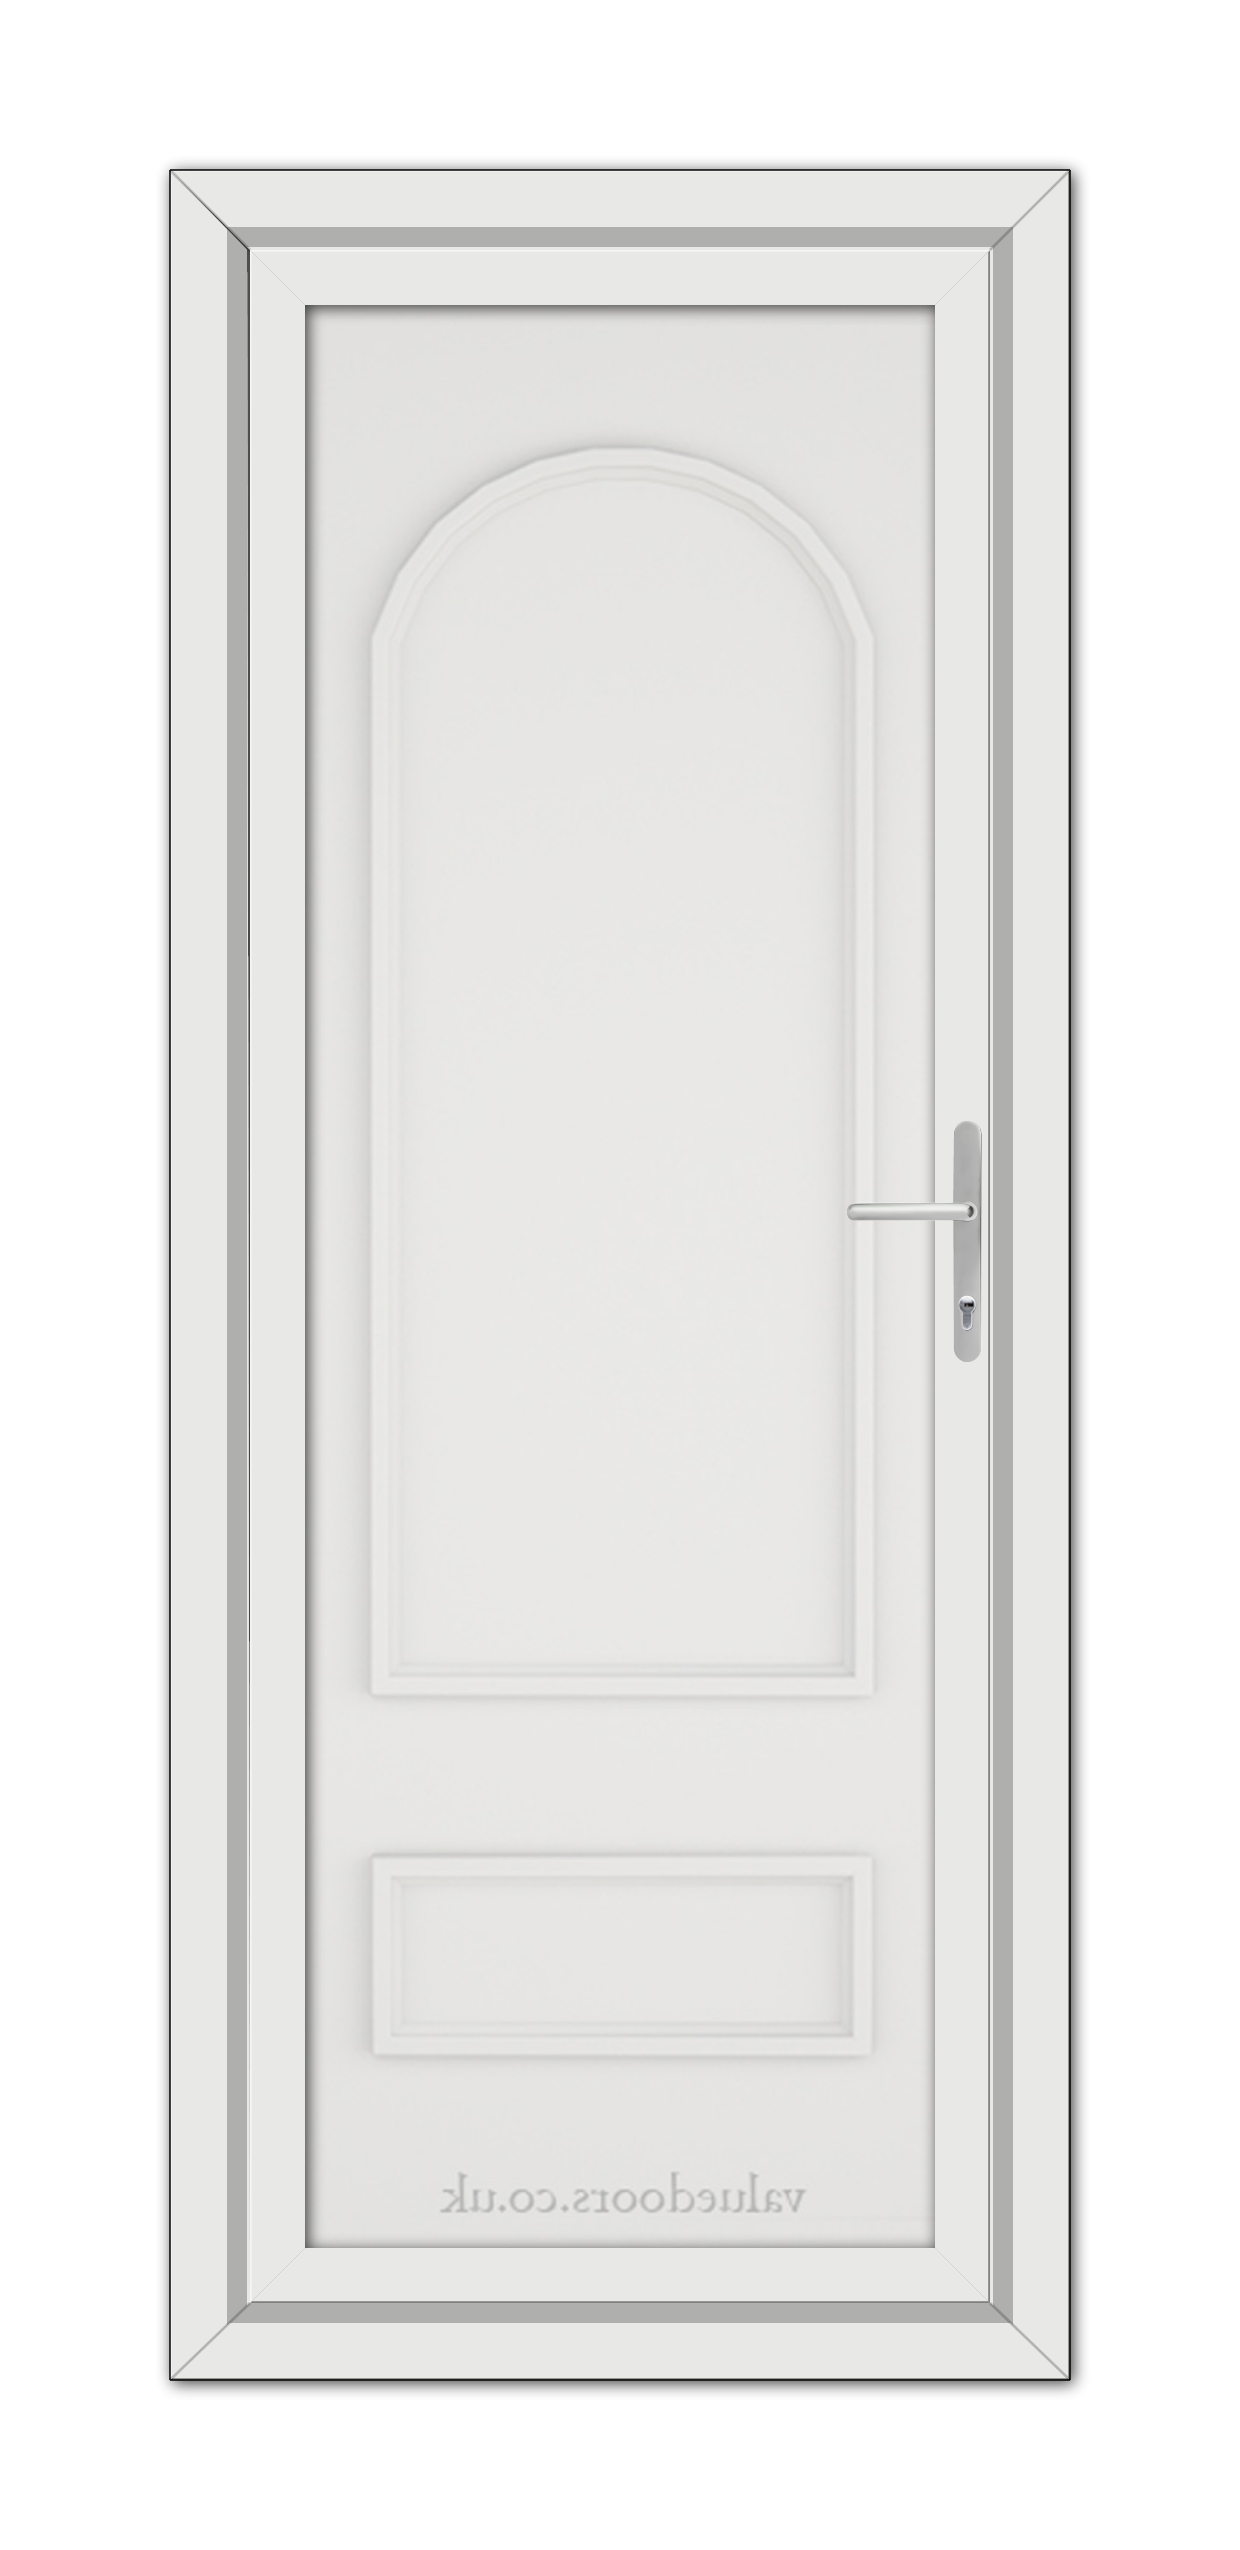 A White Canterbury Solid uPVC Door with an arched top and panels, featuring a silver handle on the right side, set within a simple grey frame.